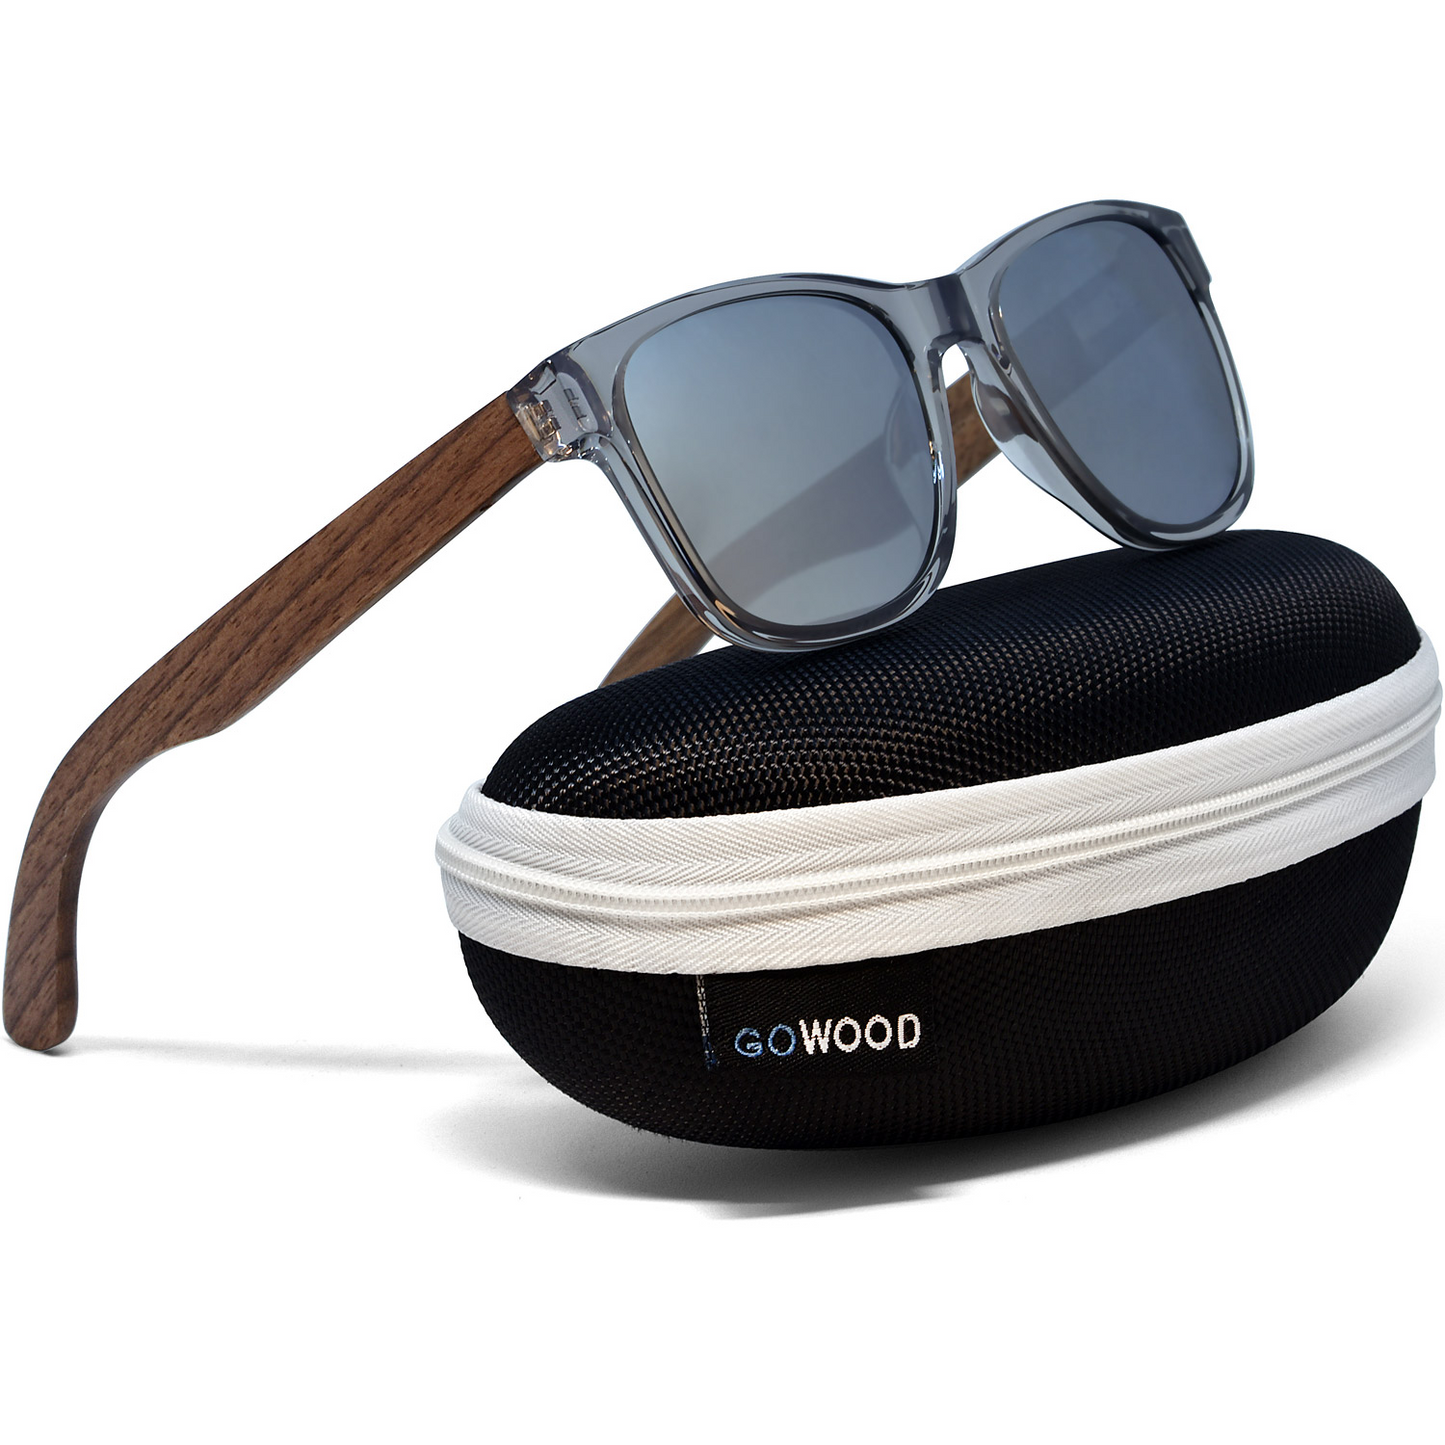 Walnut wood classic style sunglasses with semi-transparent grey frame and silver mirrored polarized lenses